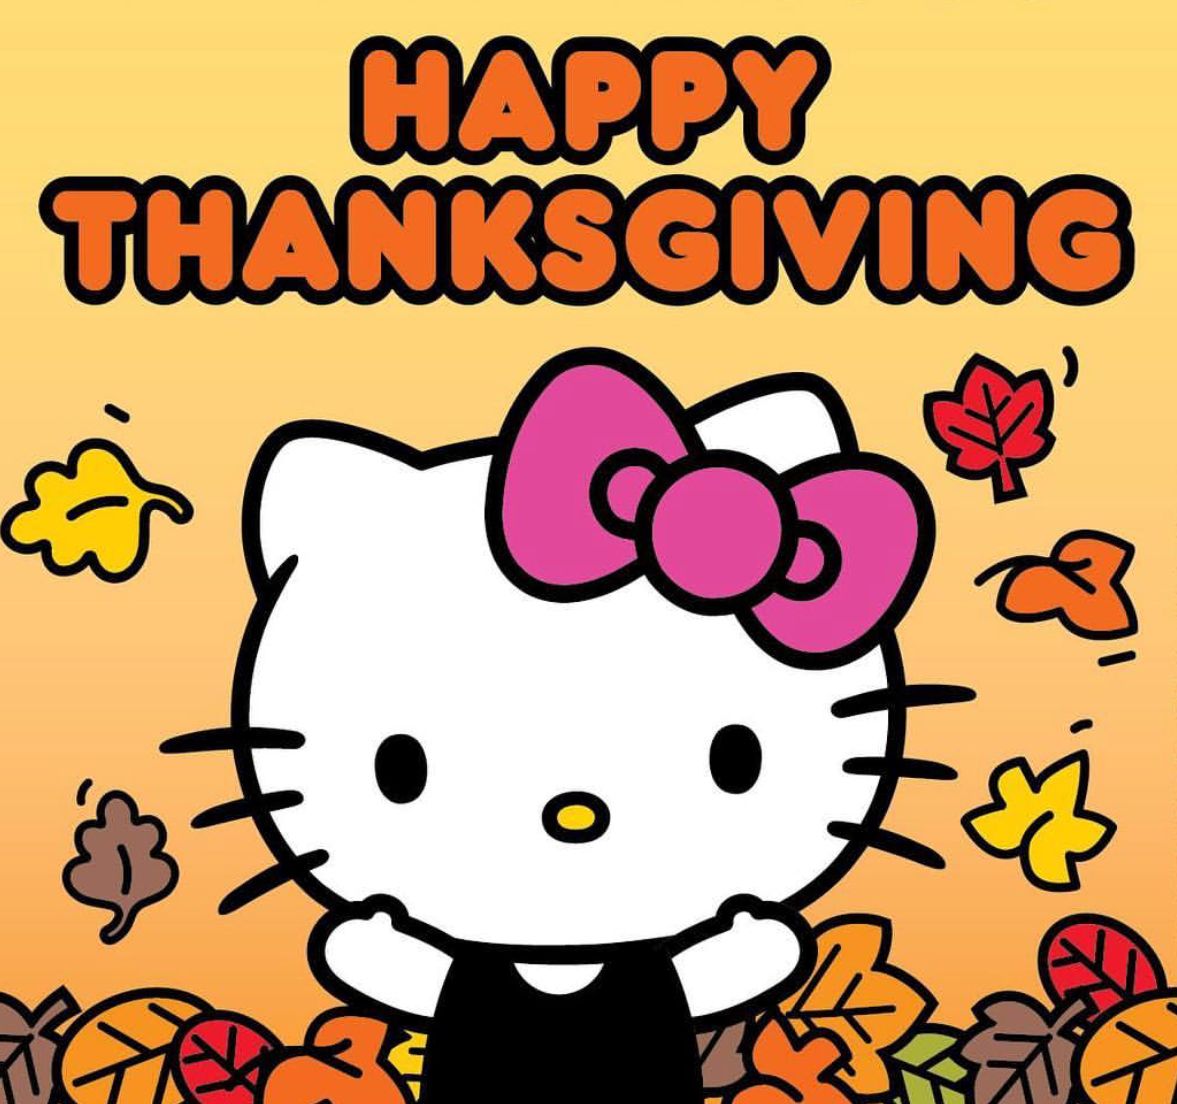 Happy Thanksgiving Hello Kitty Wallpapers - Wallpaper Cave